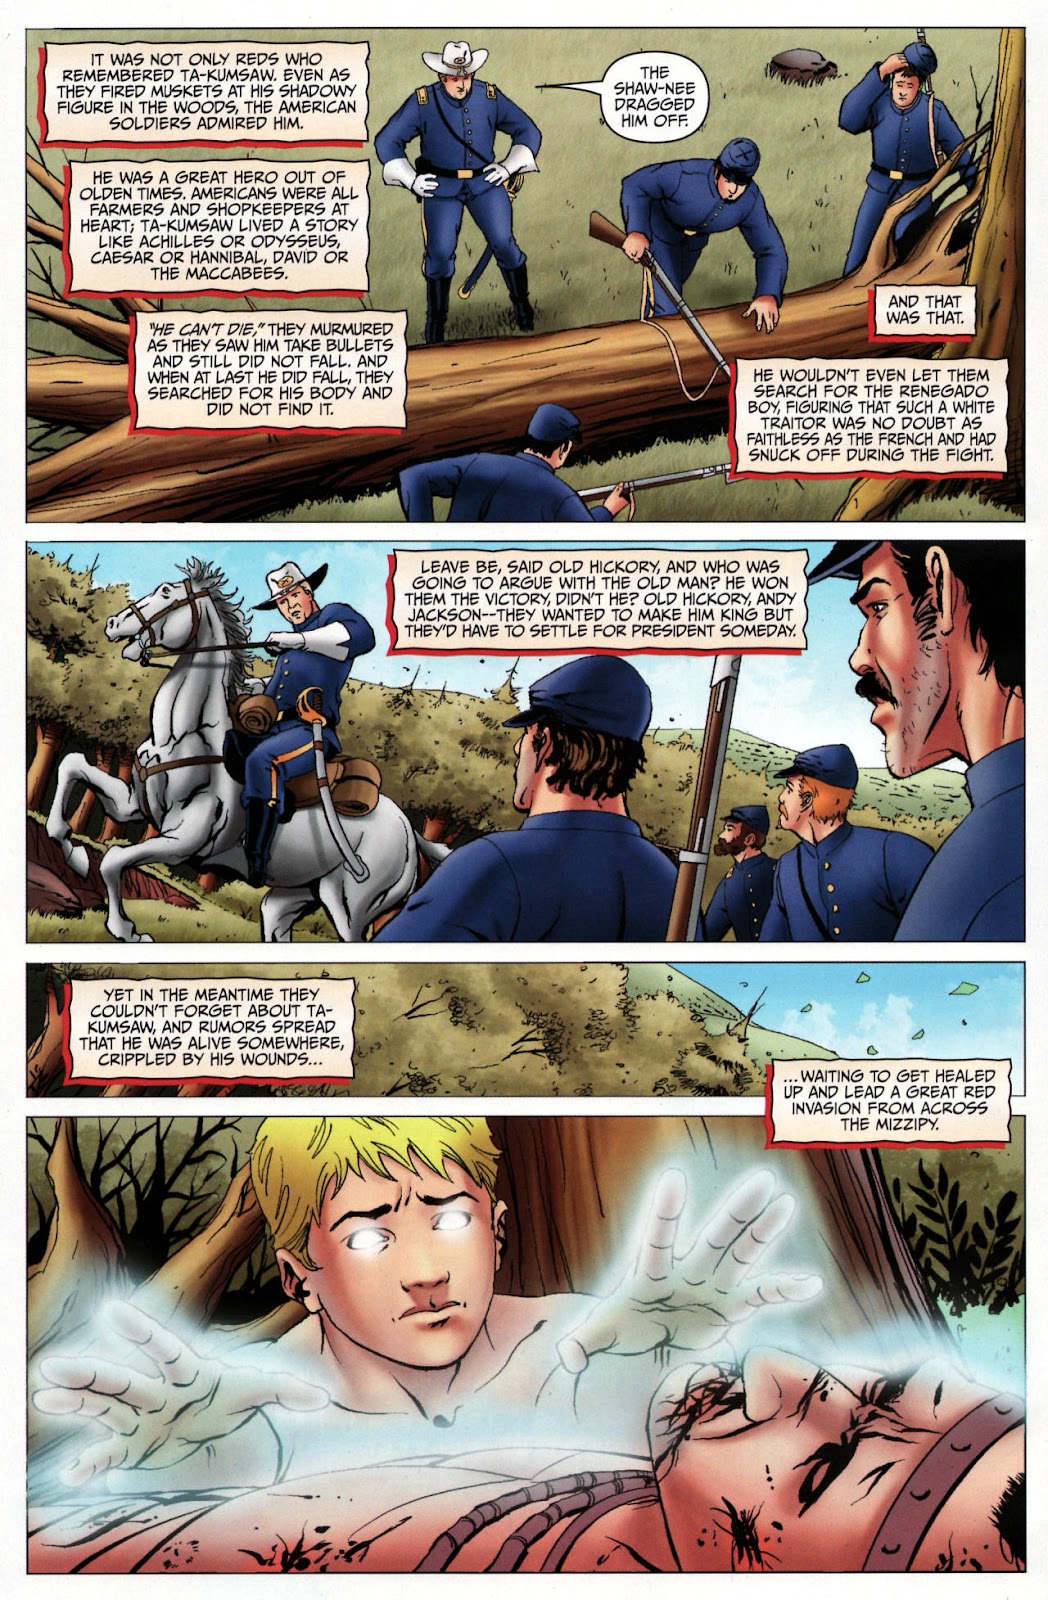 Red Prophet: The Tales of Alvin Maker issue 12 - Page 21